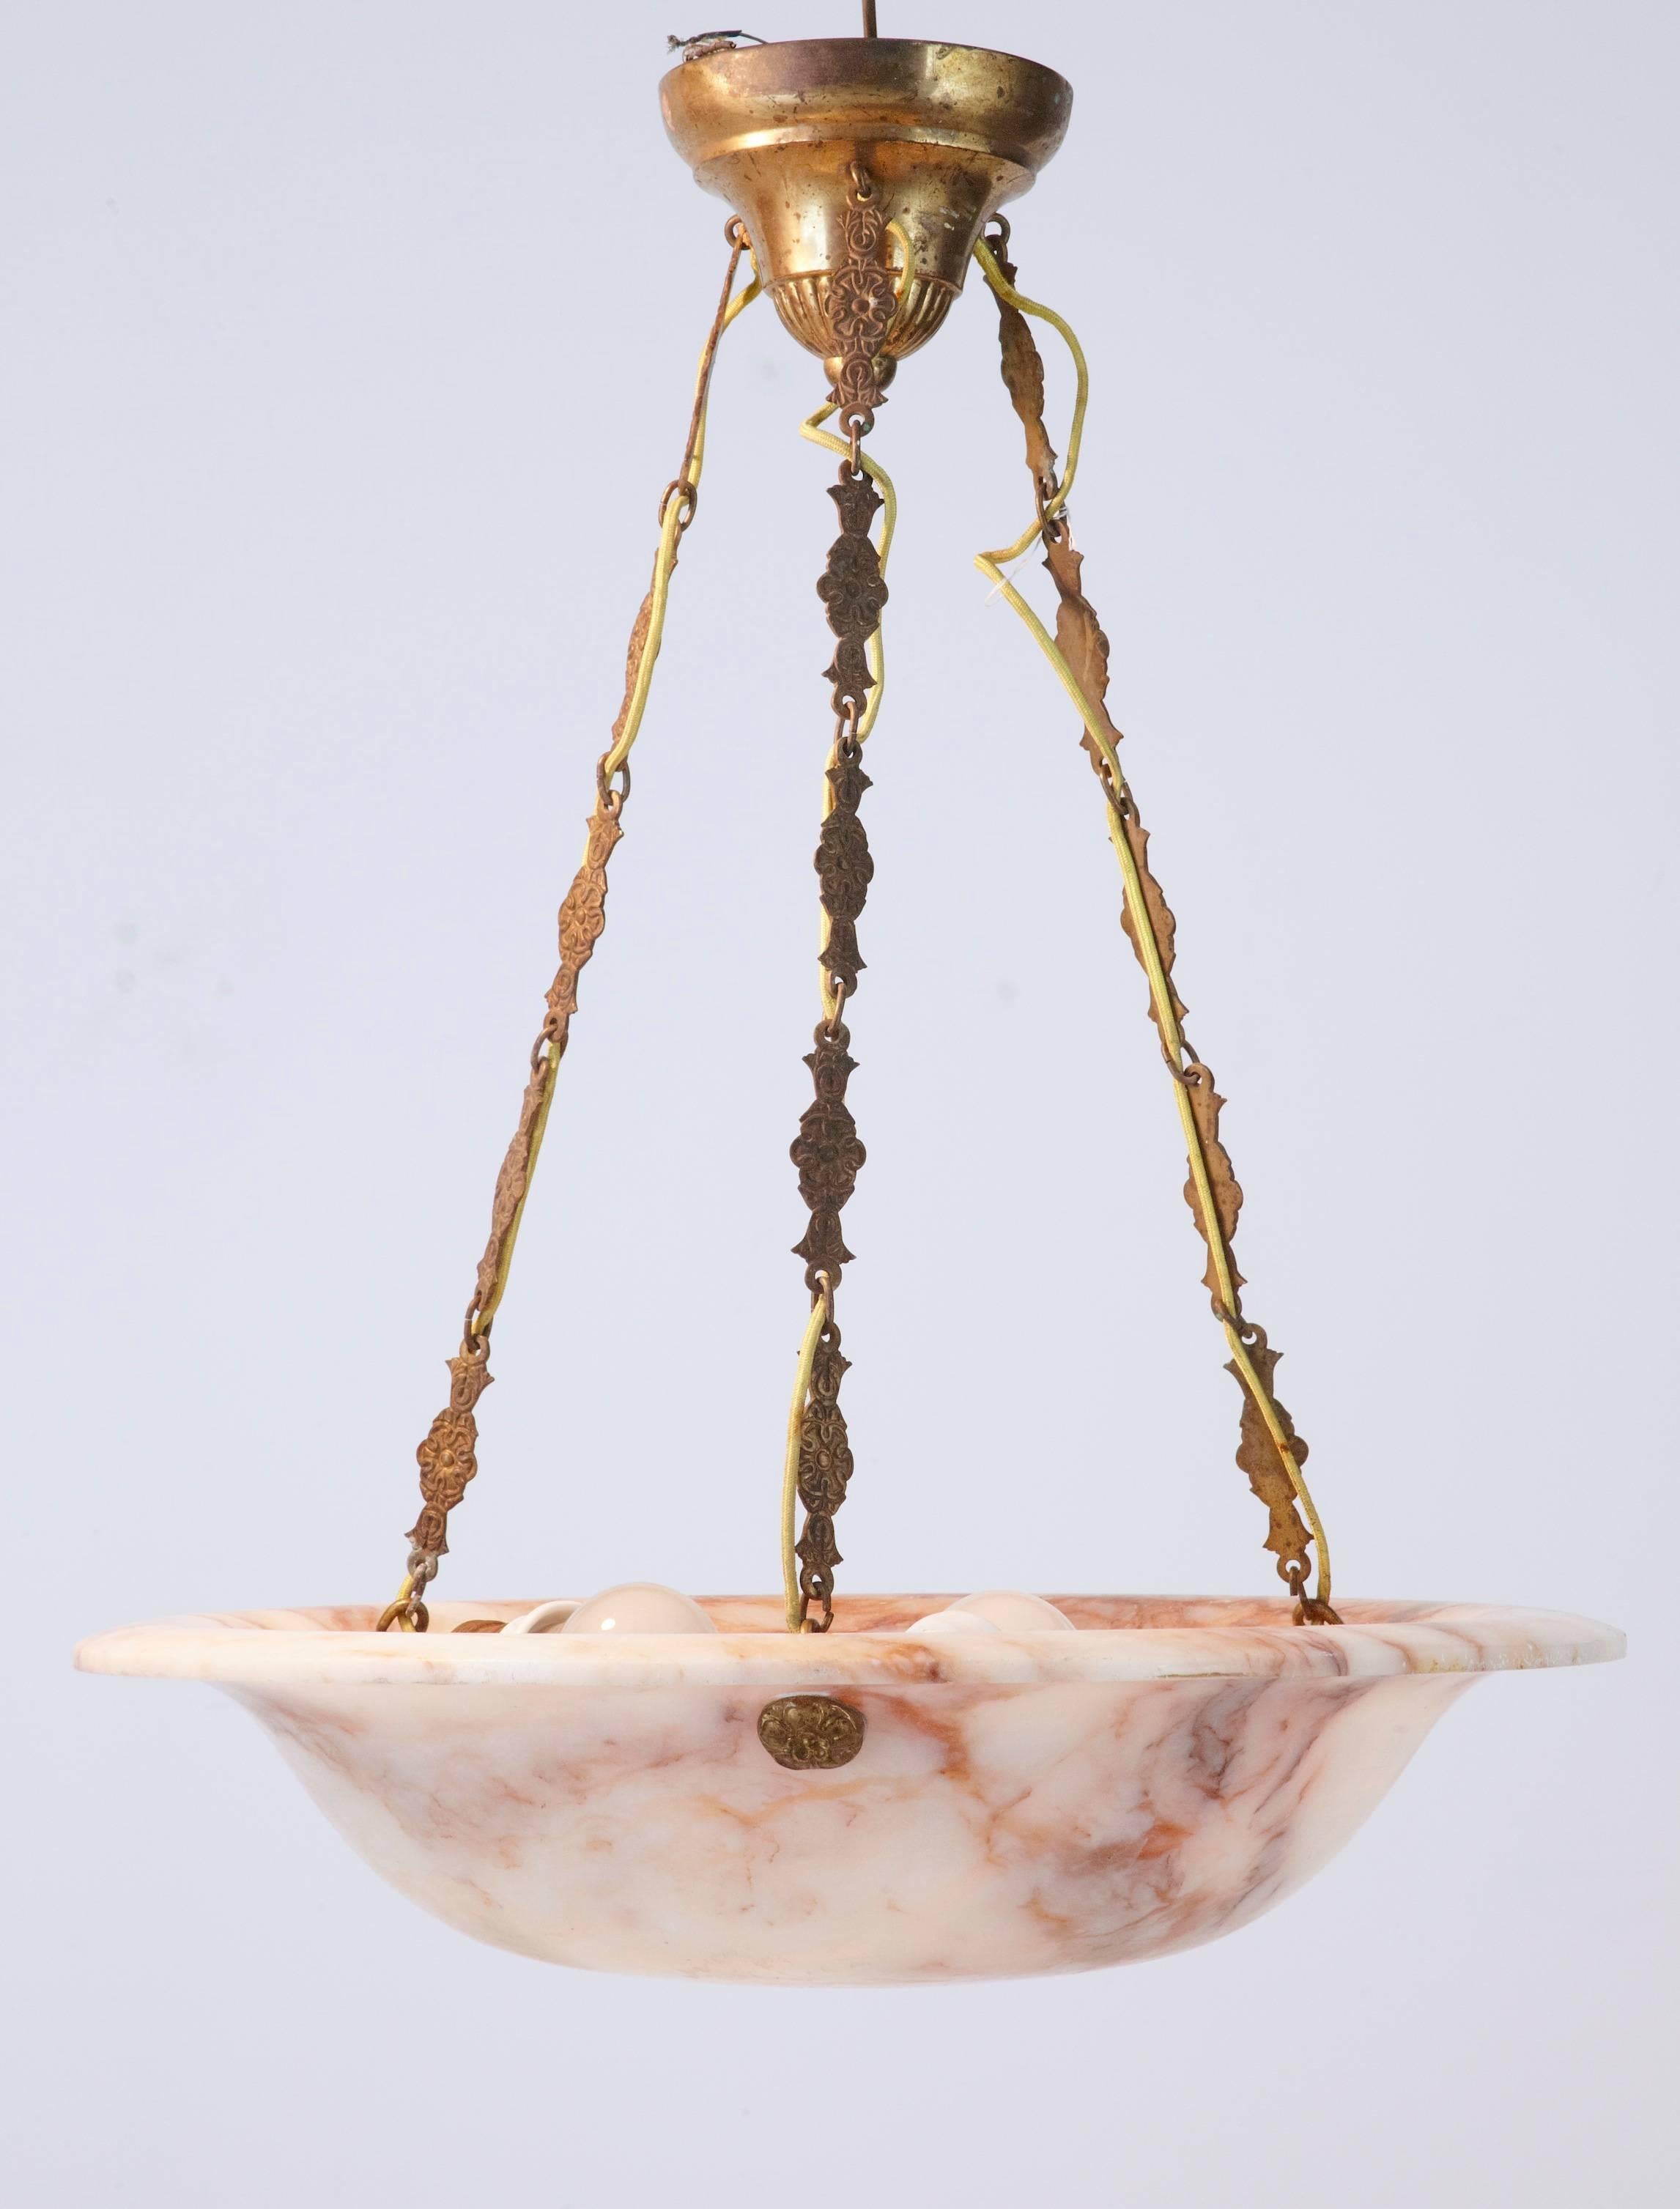 Good quality Art Deco ceiling light, circa 1920.
Beautiful pink veining flowing through the bowl.
Three bulb fittings around the bowl. Suspended by three decorative brass chains which lead up the ceiling rose.
Some marks to the bottom of the